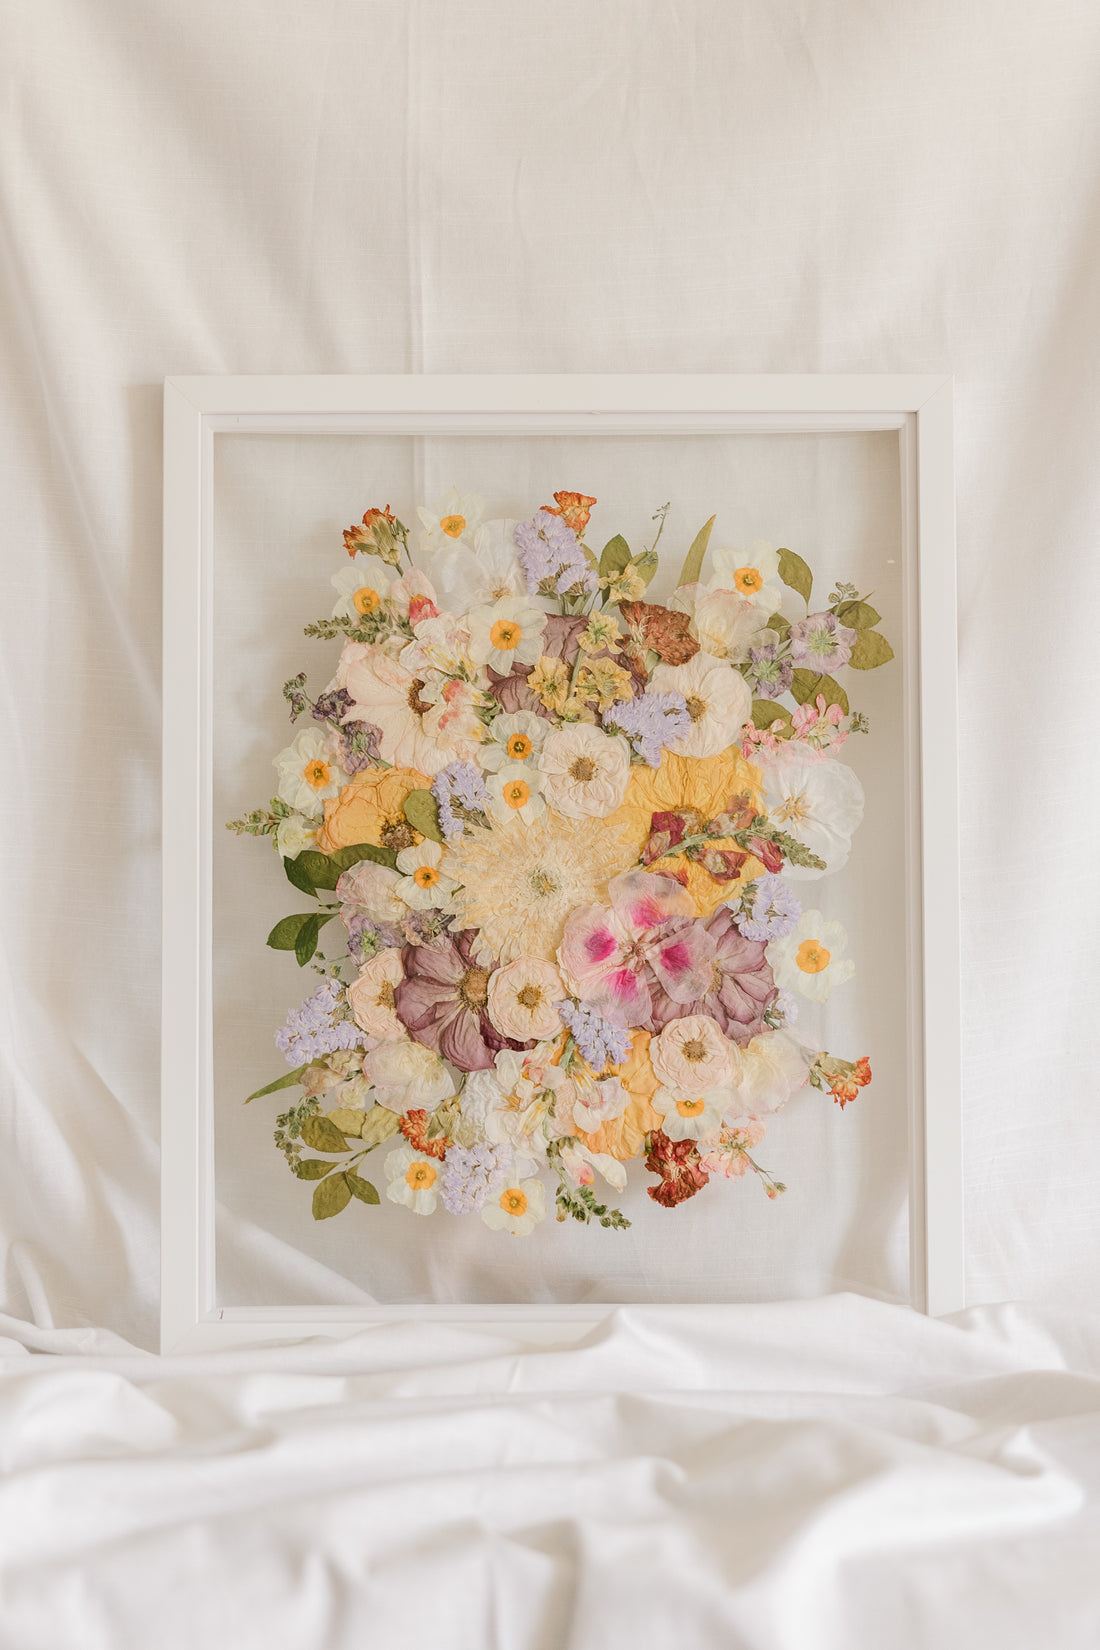 A colorful spring-time pressed bouquet on display in a white wood glass floating frame.